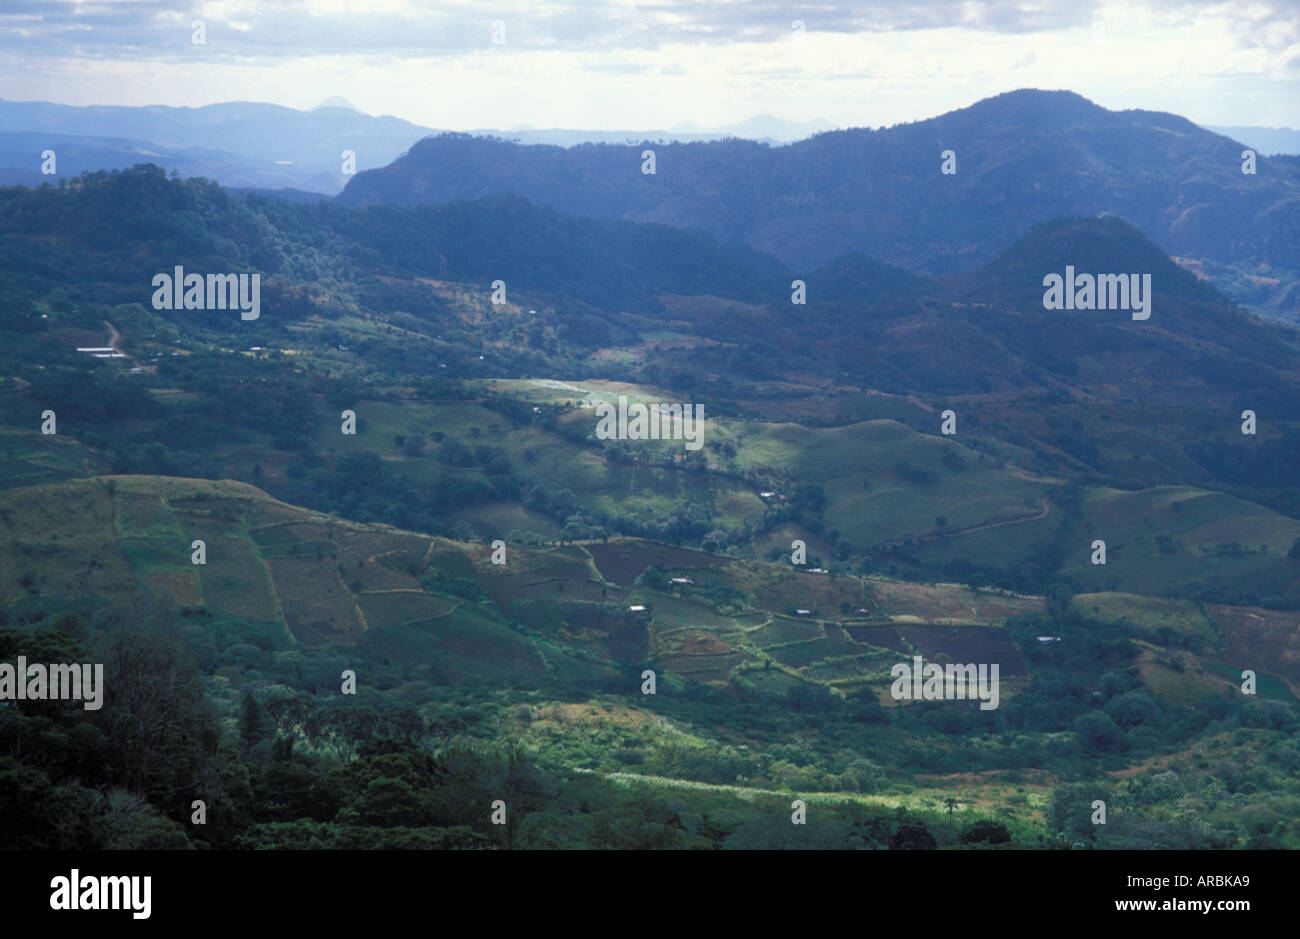 Agricultural land cleared from forested mountains along road between Matagalpa and Jinotega N Nicragua Stock Photo